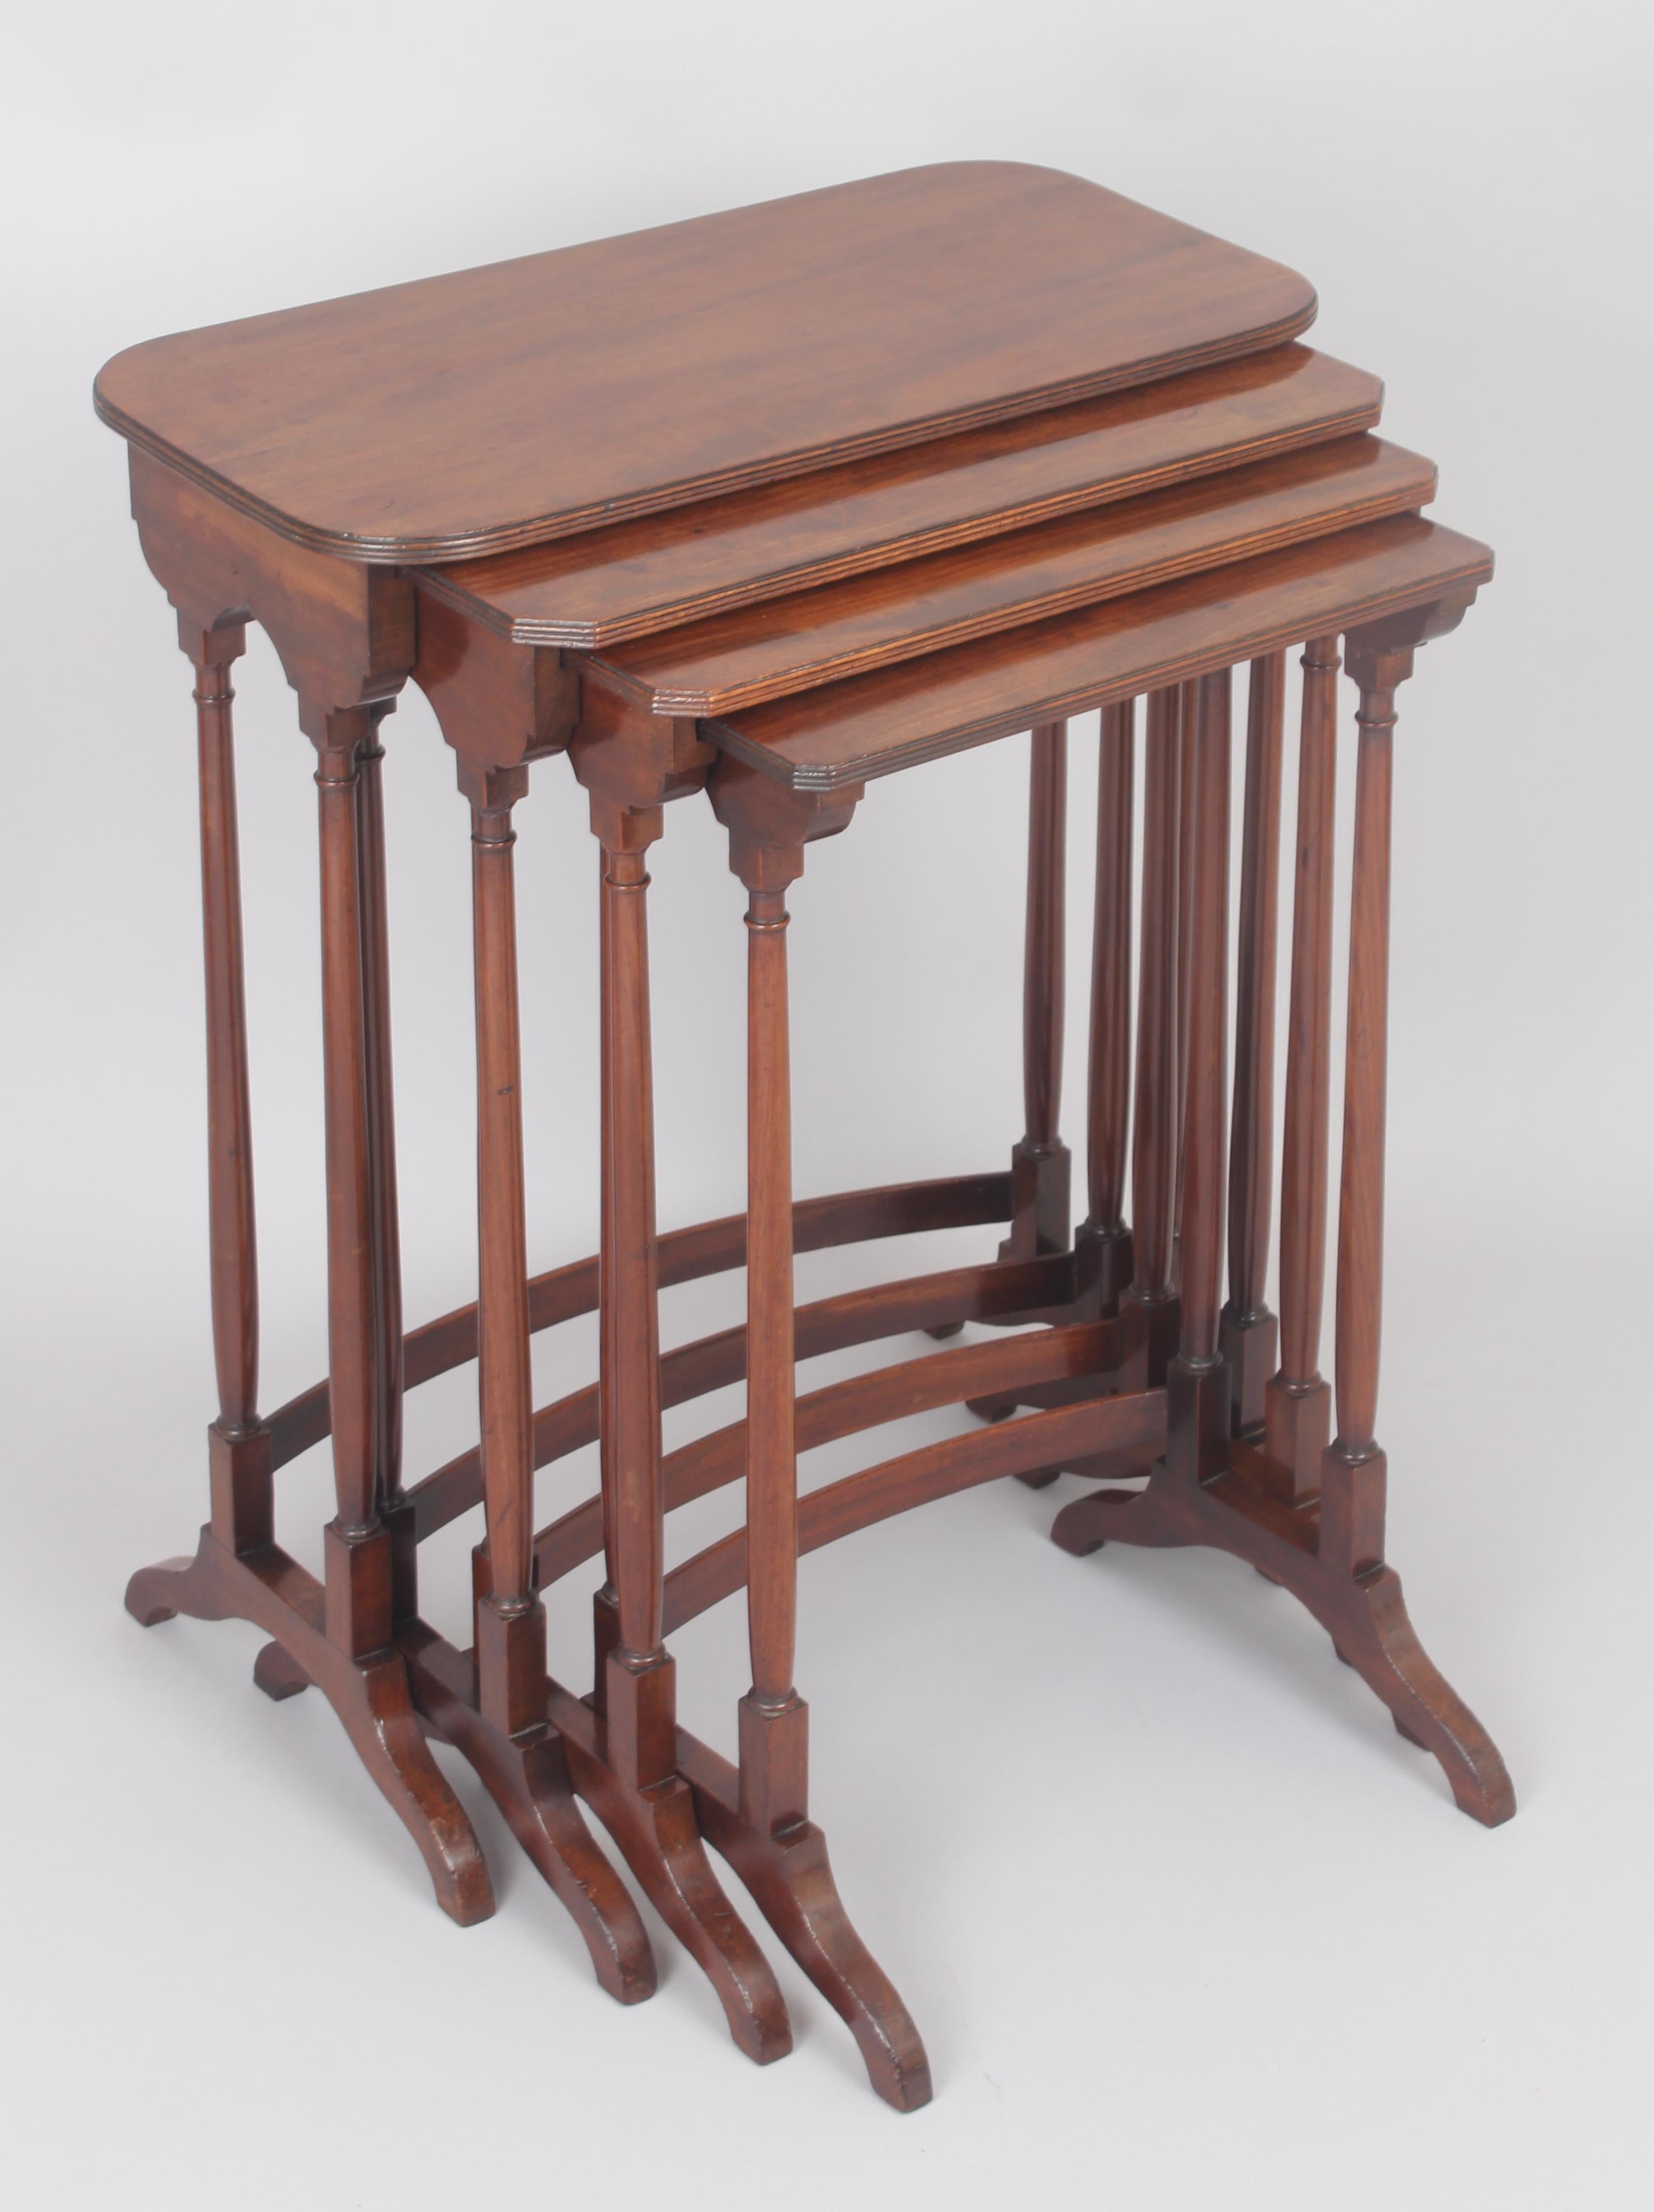 A particularly fine and high quality George III period mahogany set of quartetto tables. High quality timber, the tops with rounded and angled corners, and reeded edges. Mounted on slender turned legs united by beautifully bowed stretchers.